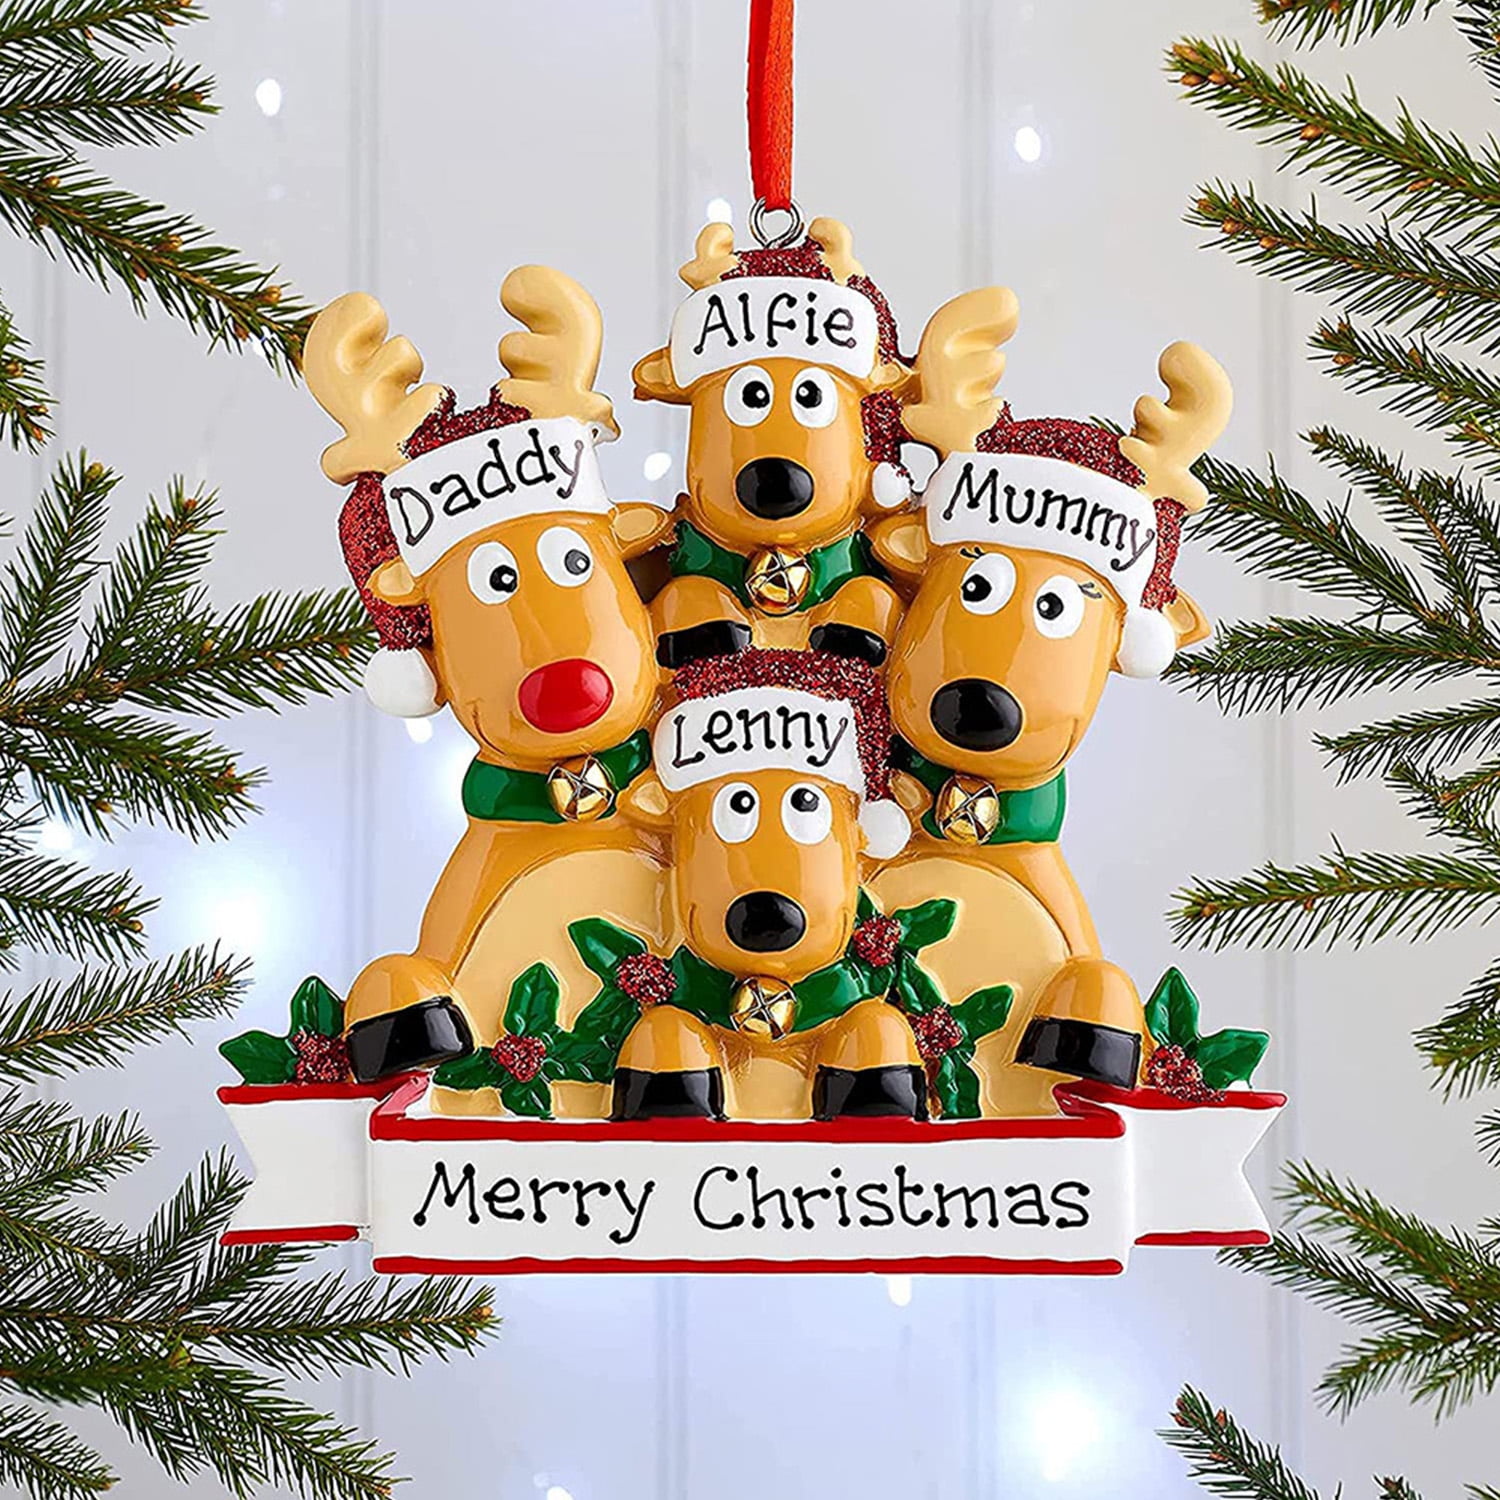 Happy Family Present Gifts for Family Christmas Morning Personalized Reindeer Christmas Ornaments Family of 3 Custom Deer Christmas Tree Ornament 3 Family 2021 